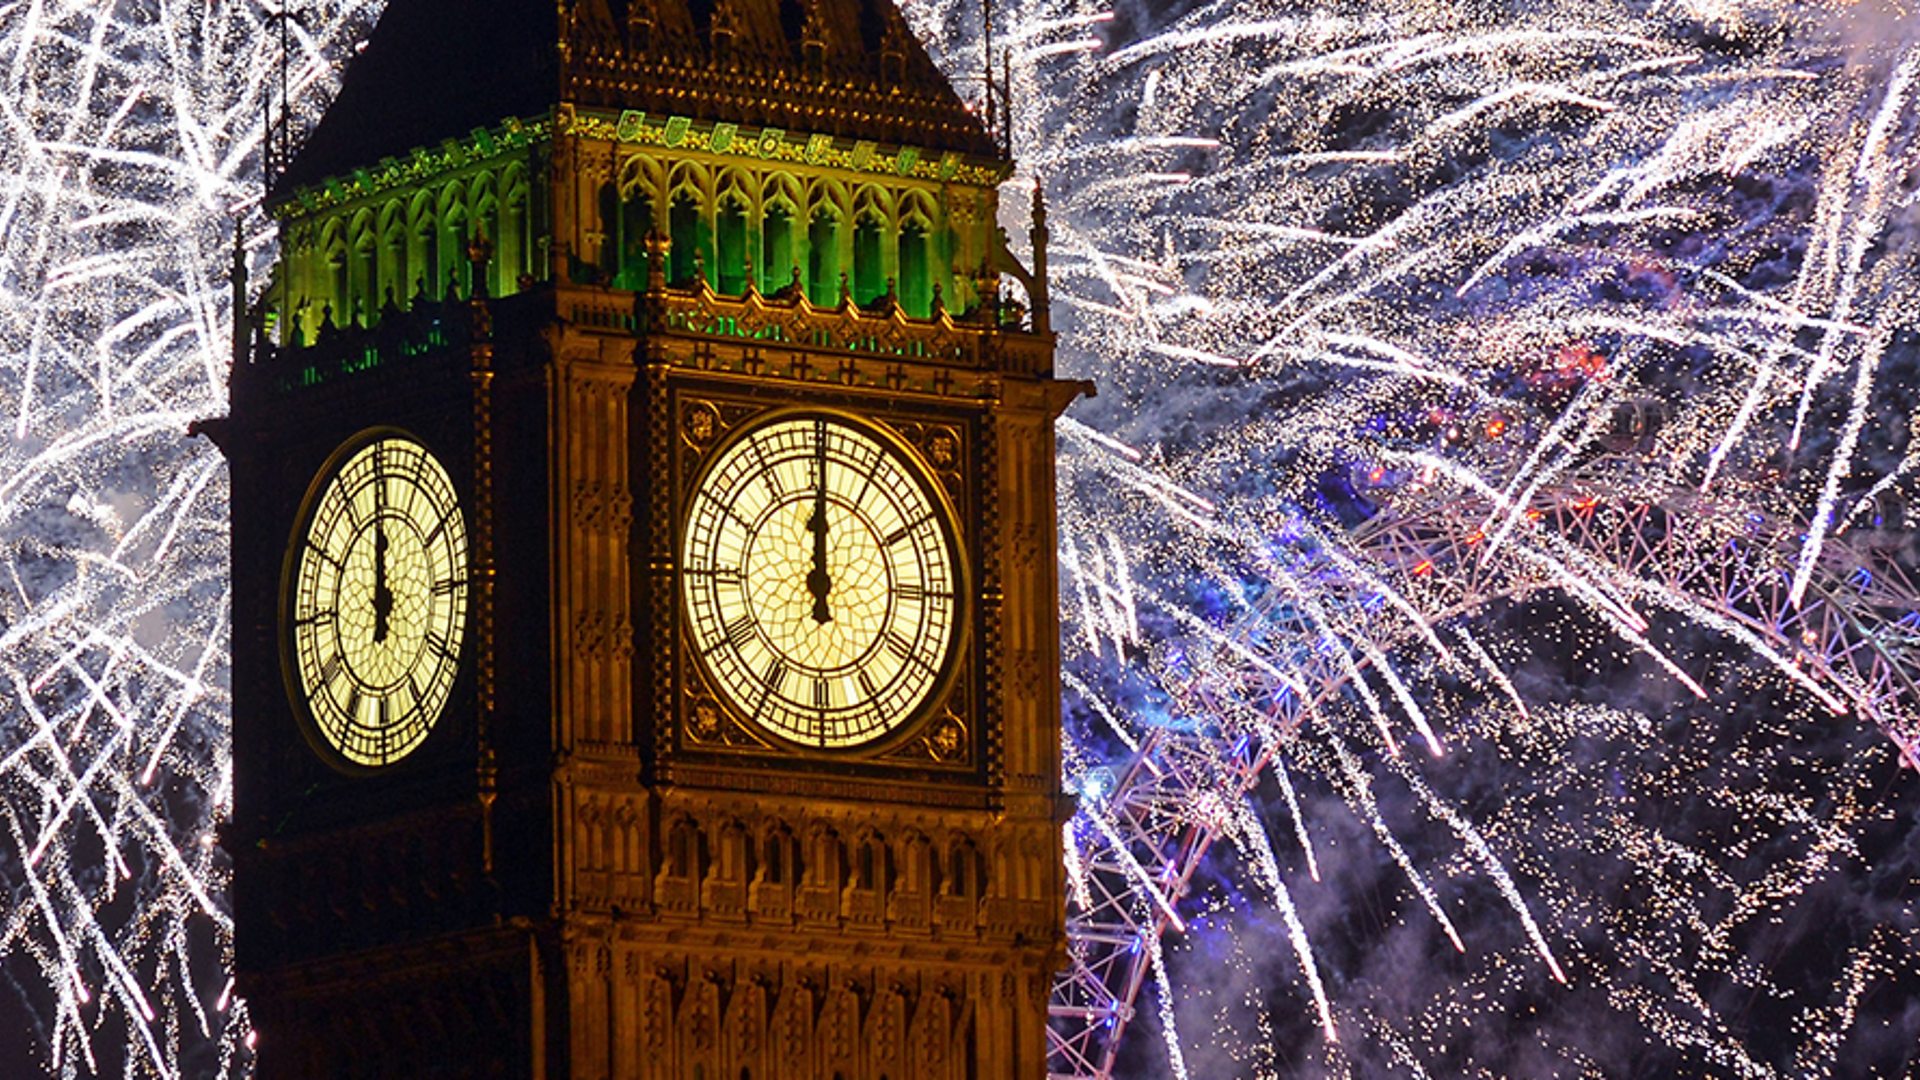 Big Ben, London's clock tower, will chime at midnight: